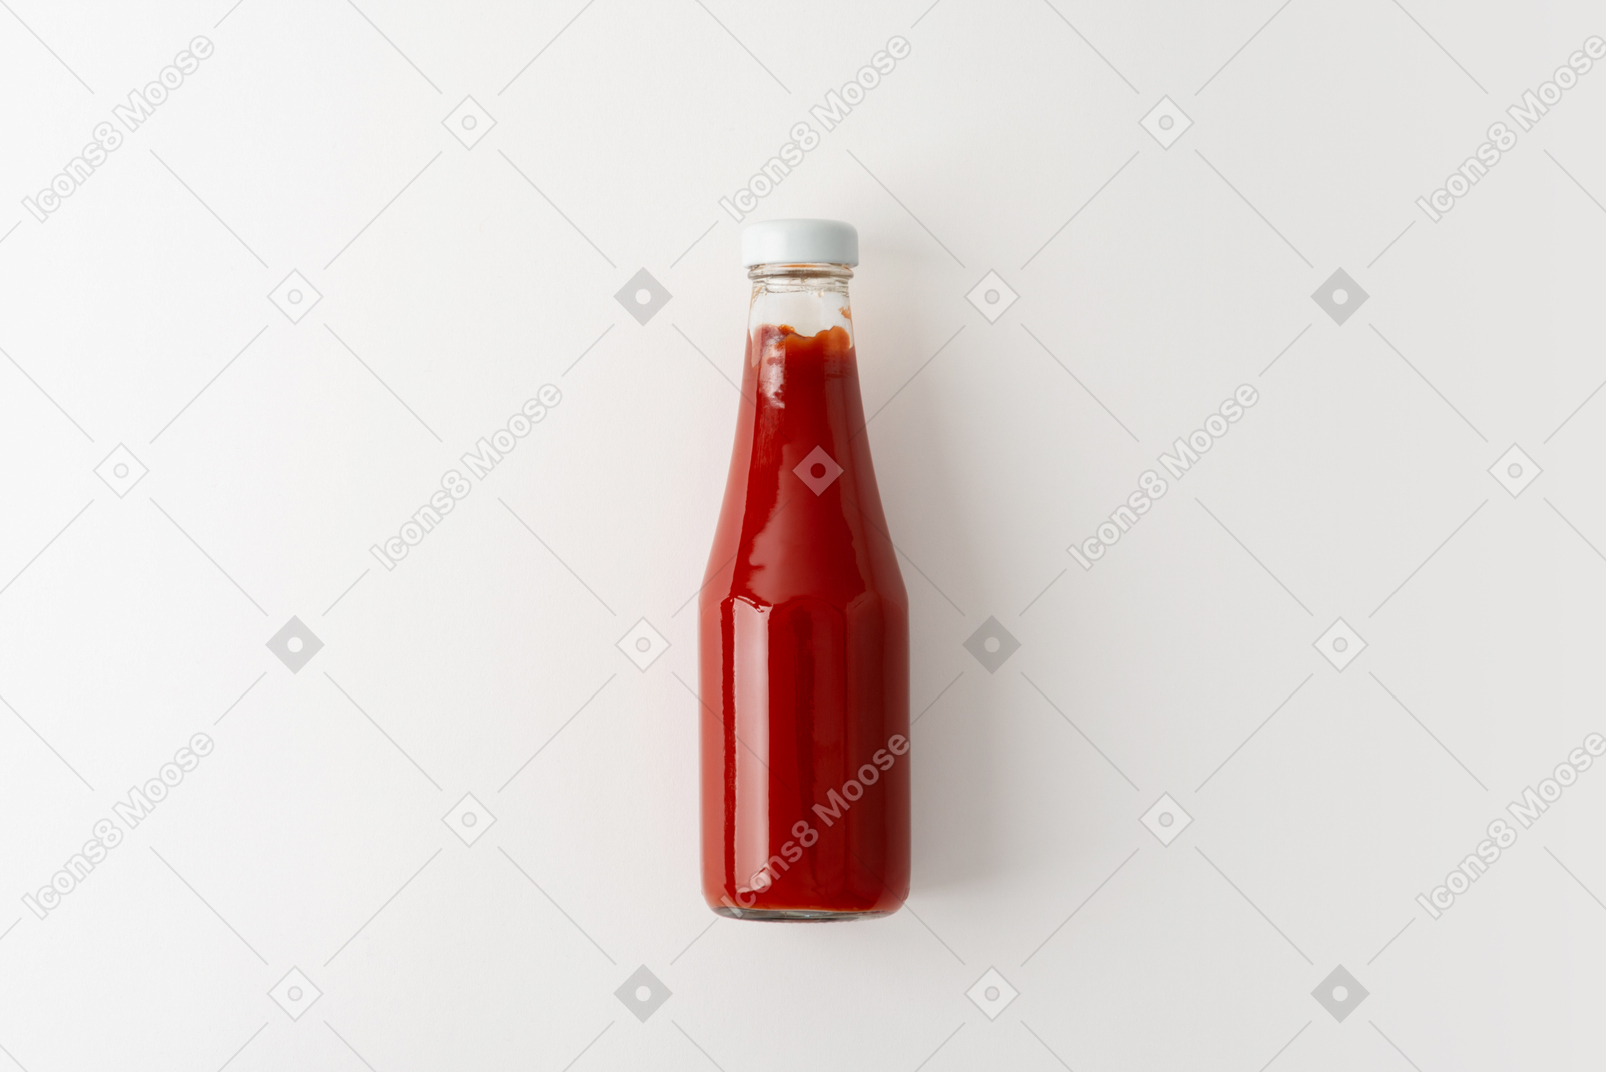 Ketchup is good for everything